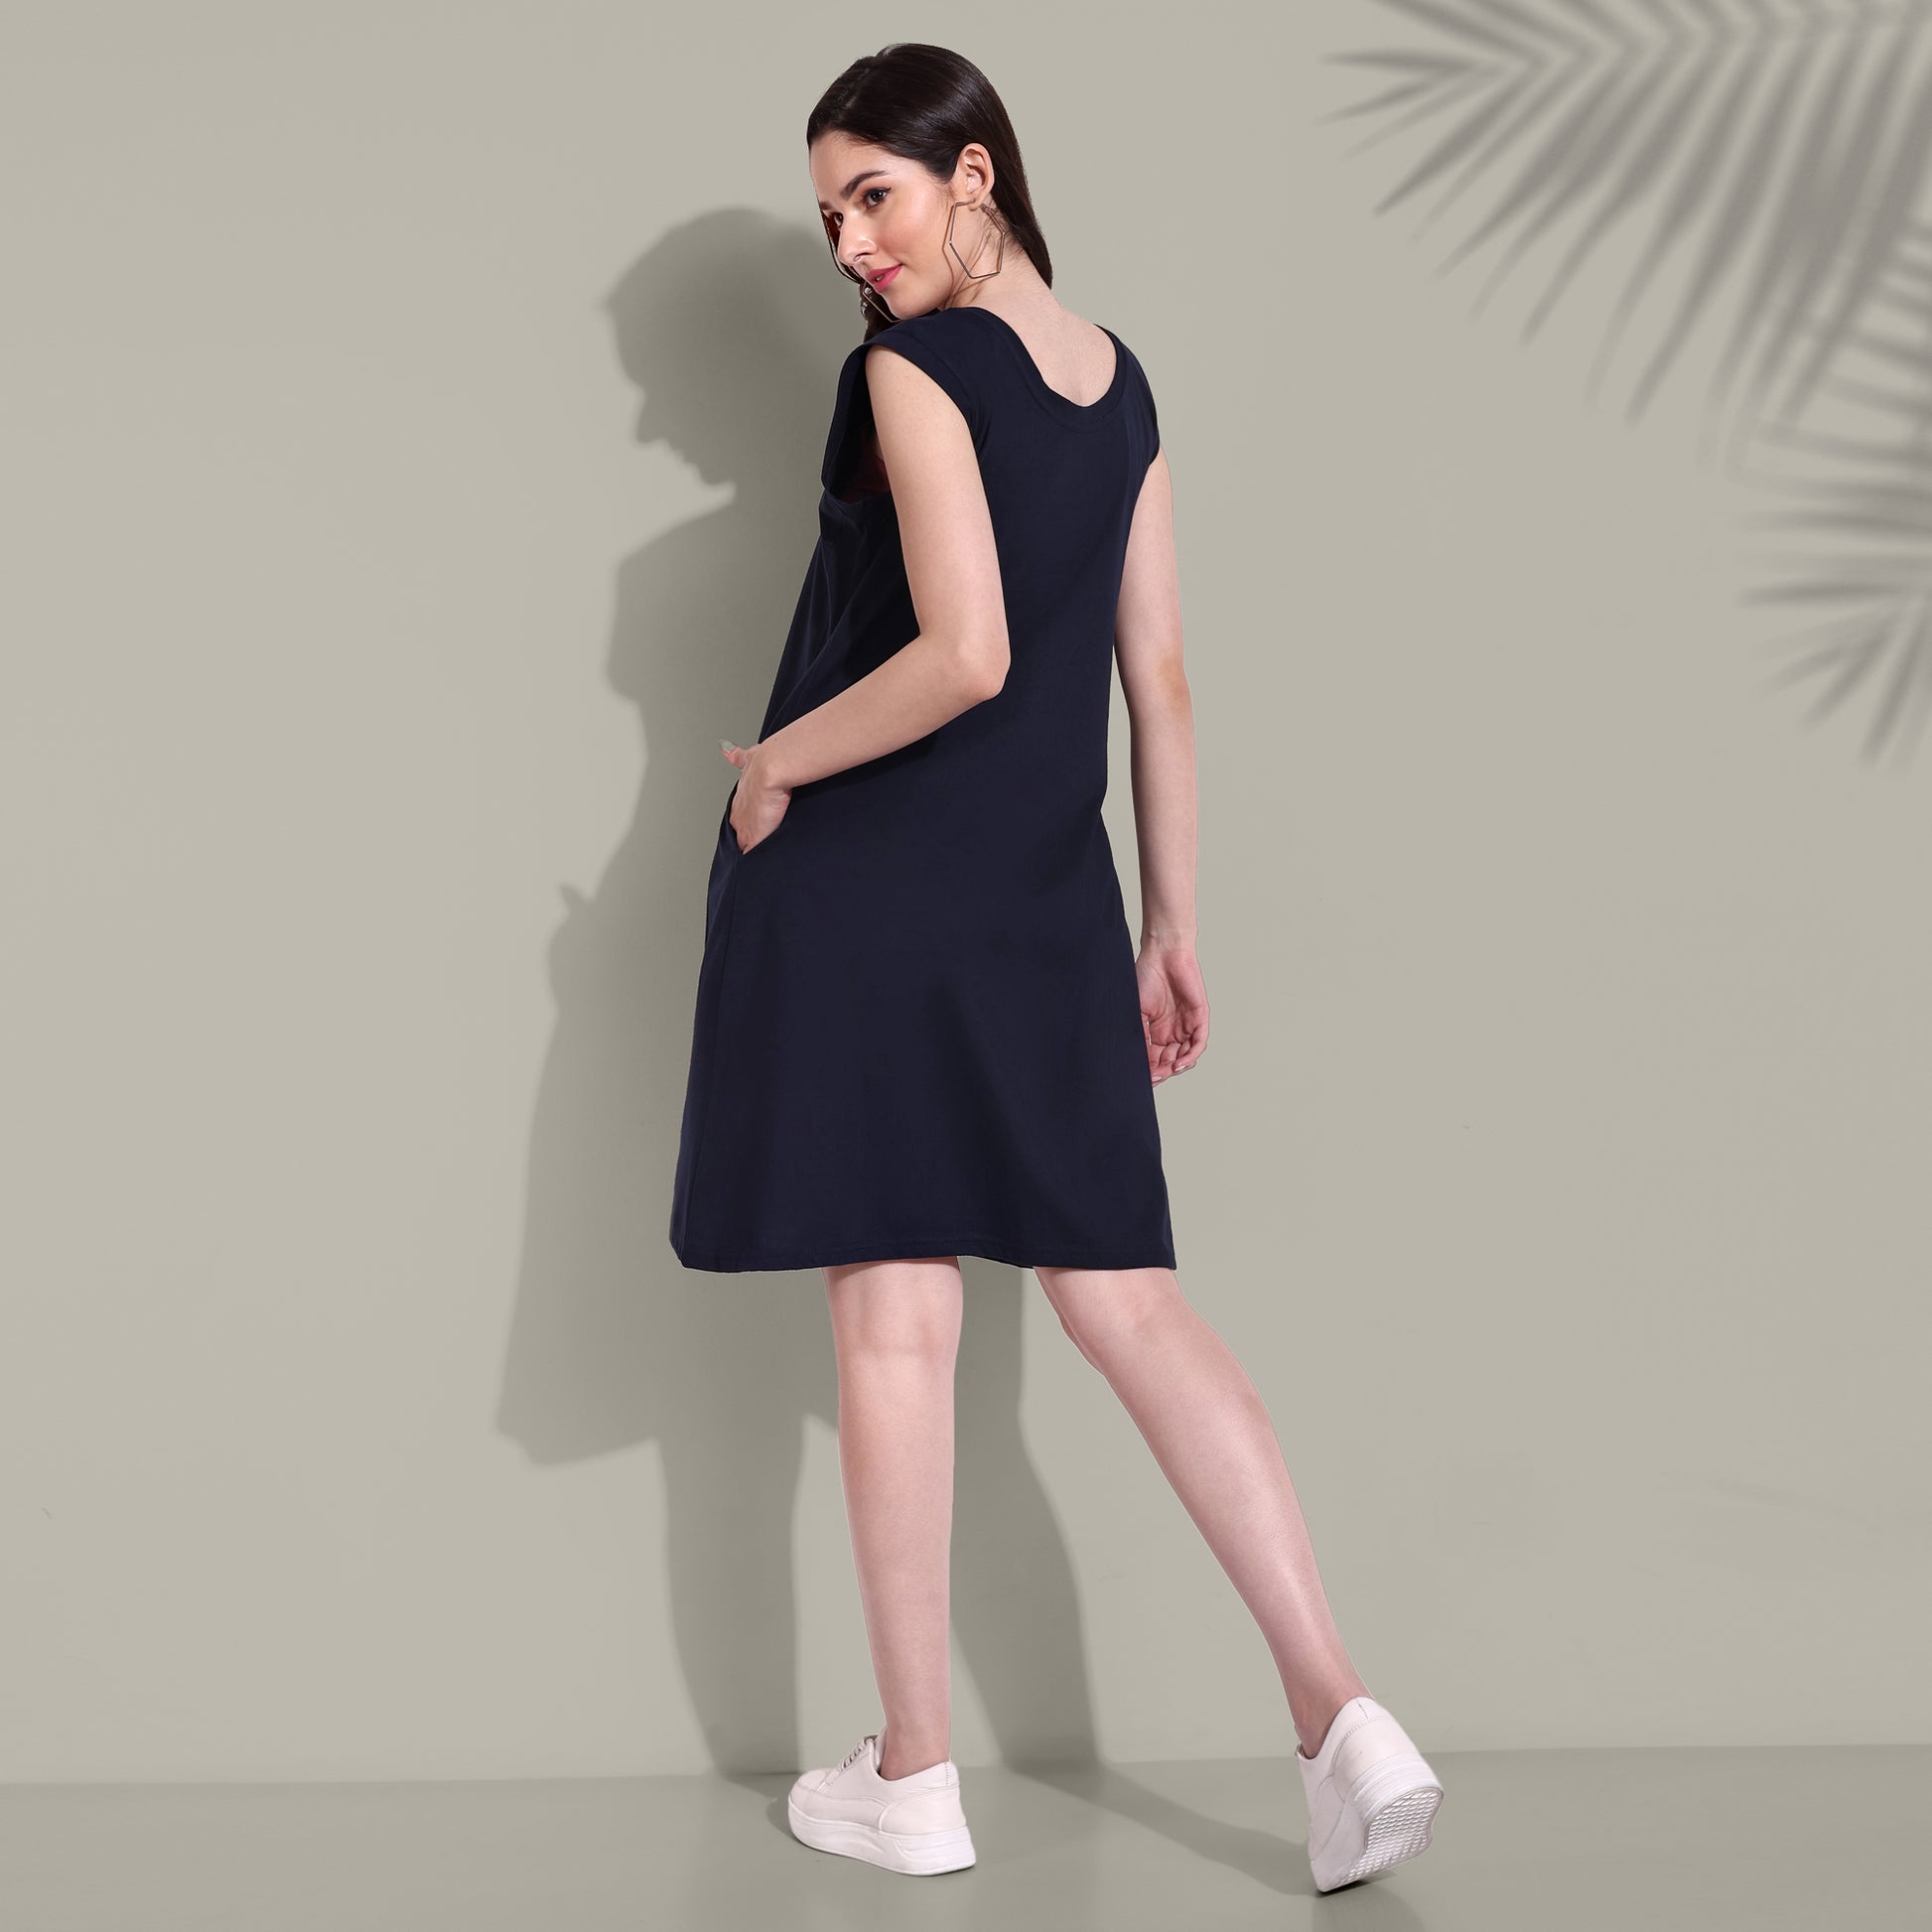 Breezy Summer Lounge Dress online in India at best prices